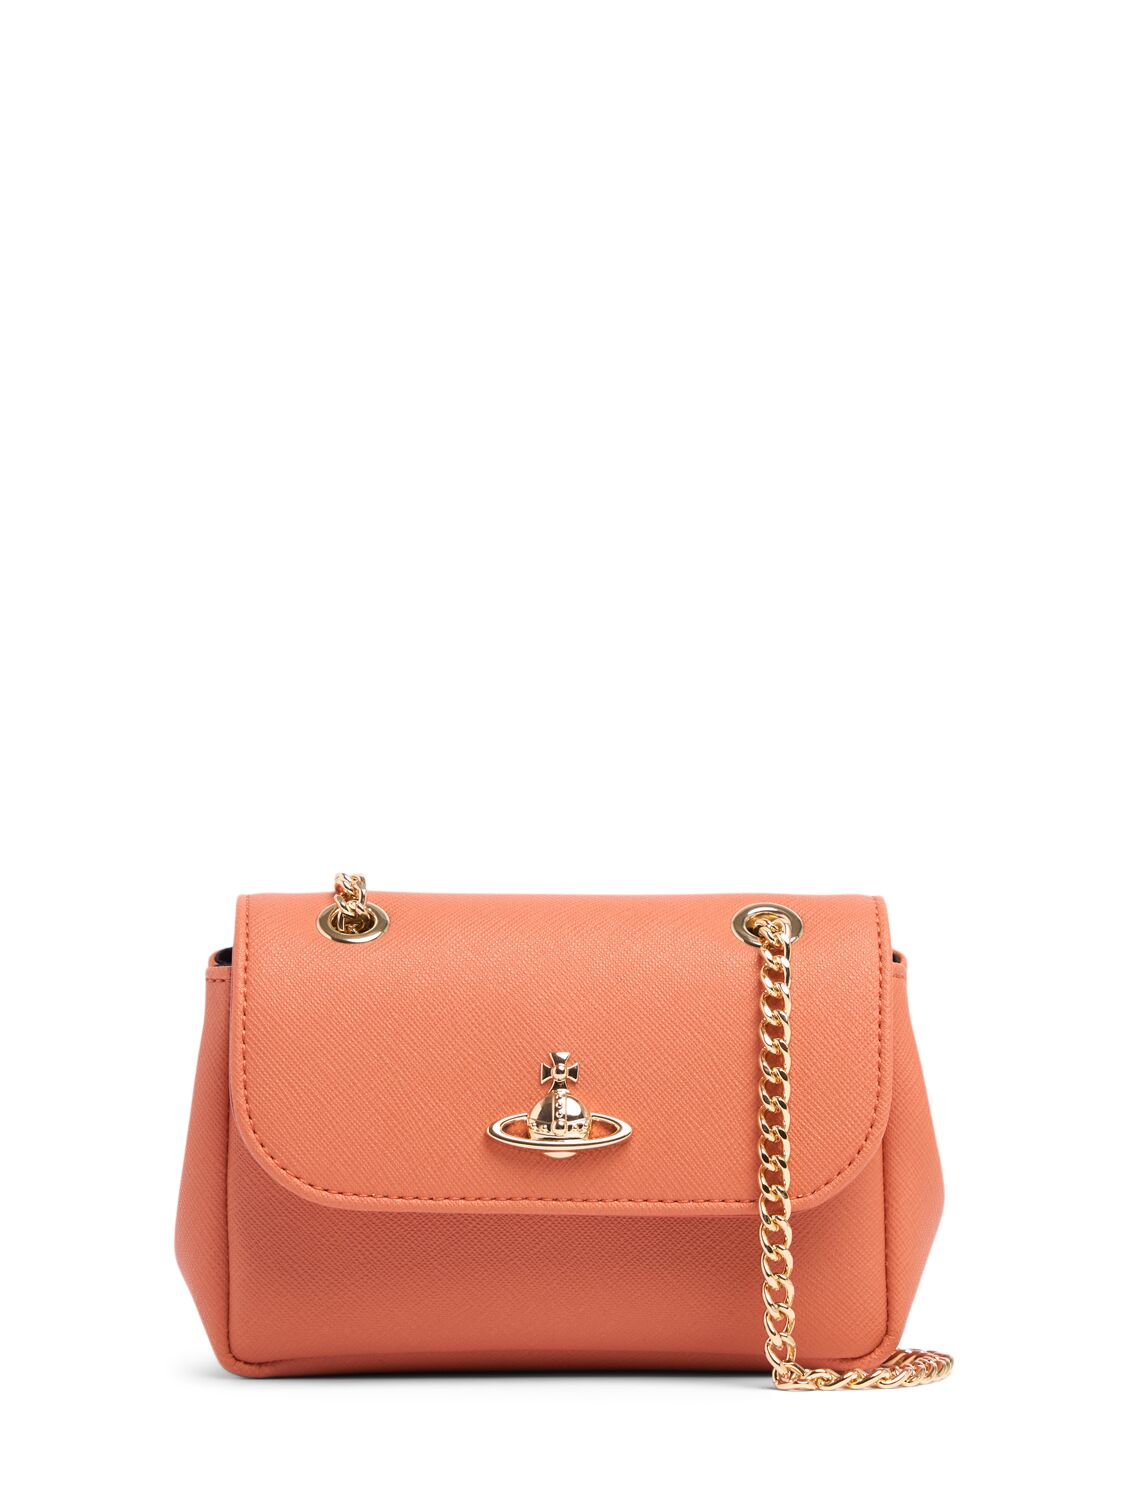 Vivienne Westwood Small Saffiano Faux Leather Bag In Orange